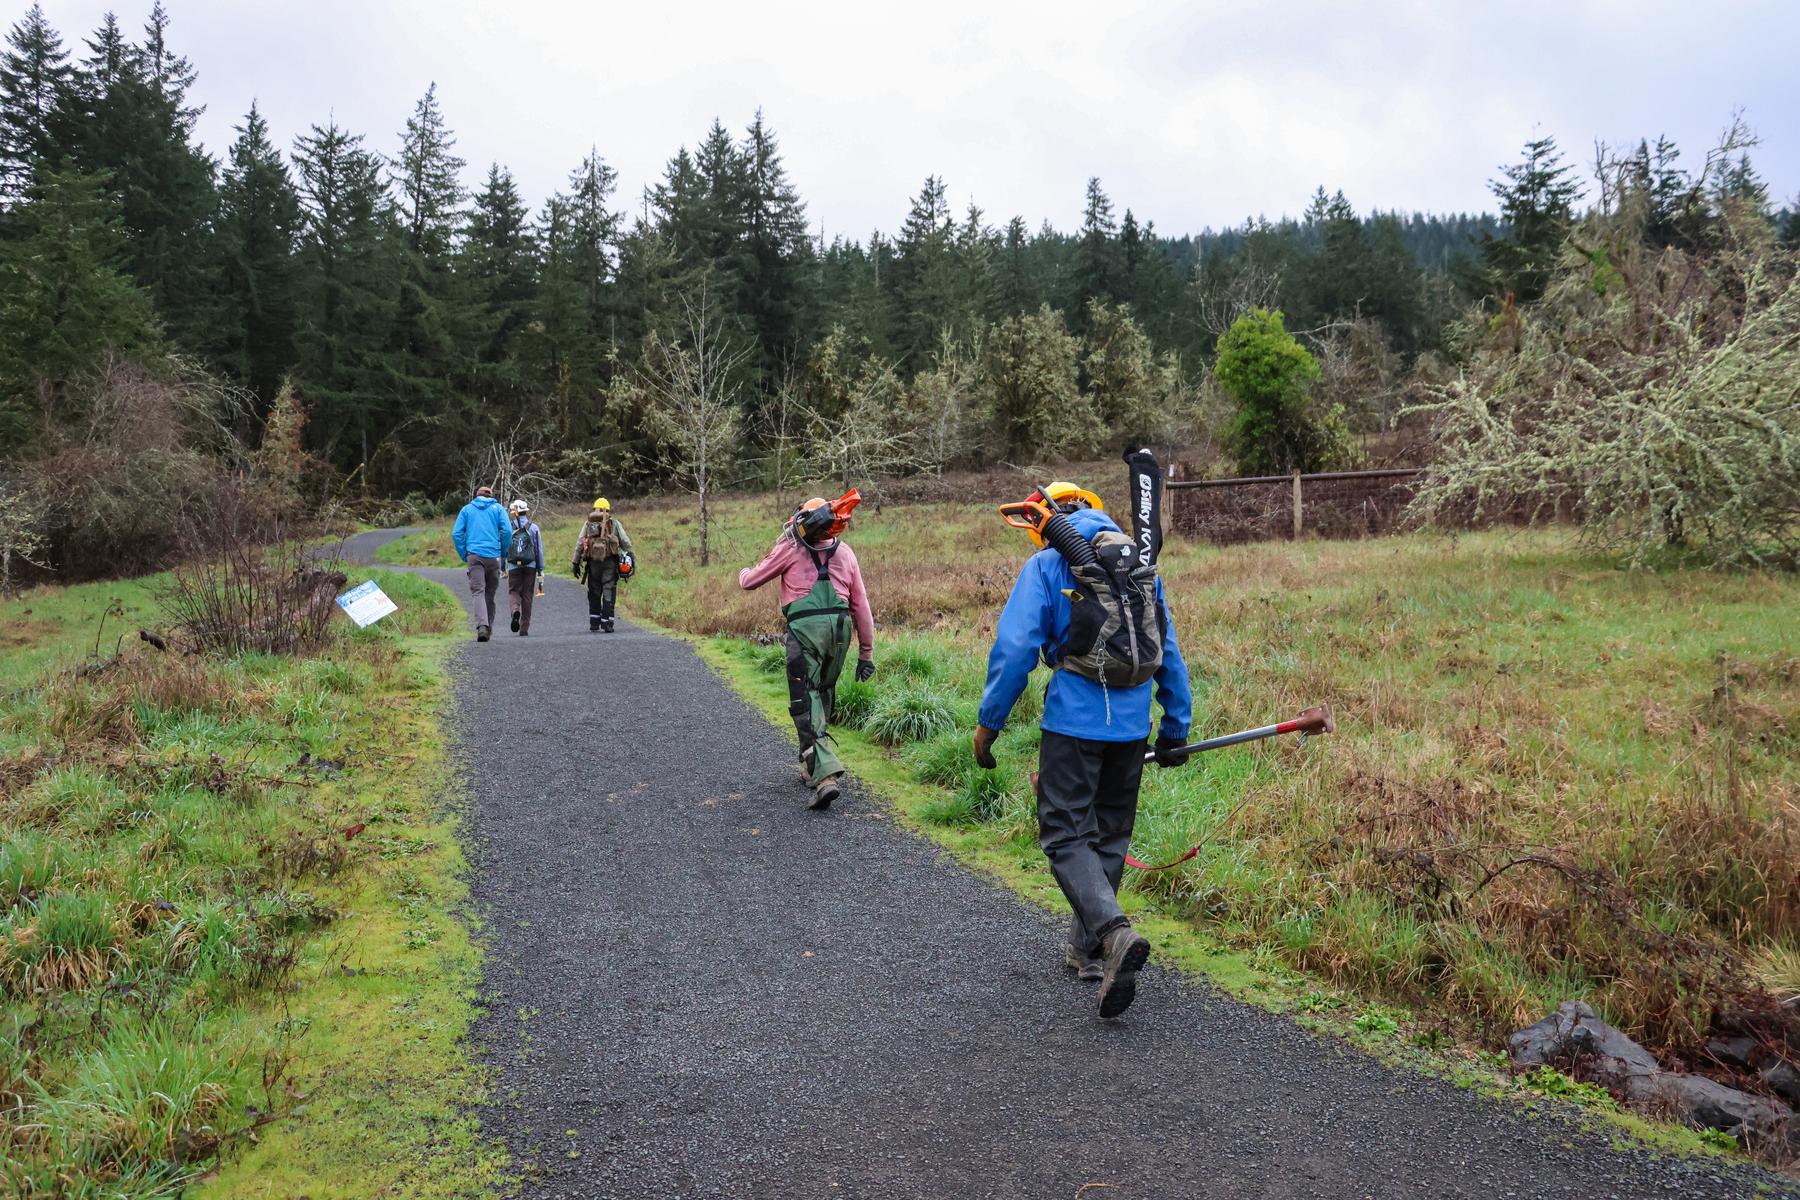 Work crews walk on path at Thurston Hills Natural Area ready to clear debris